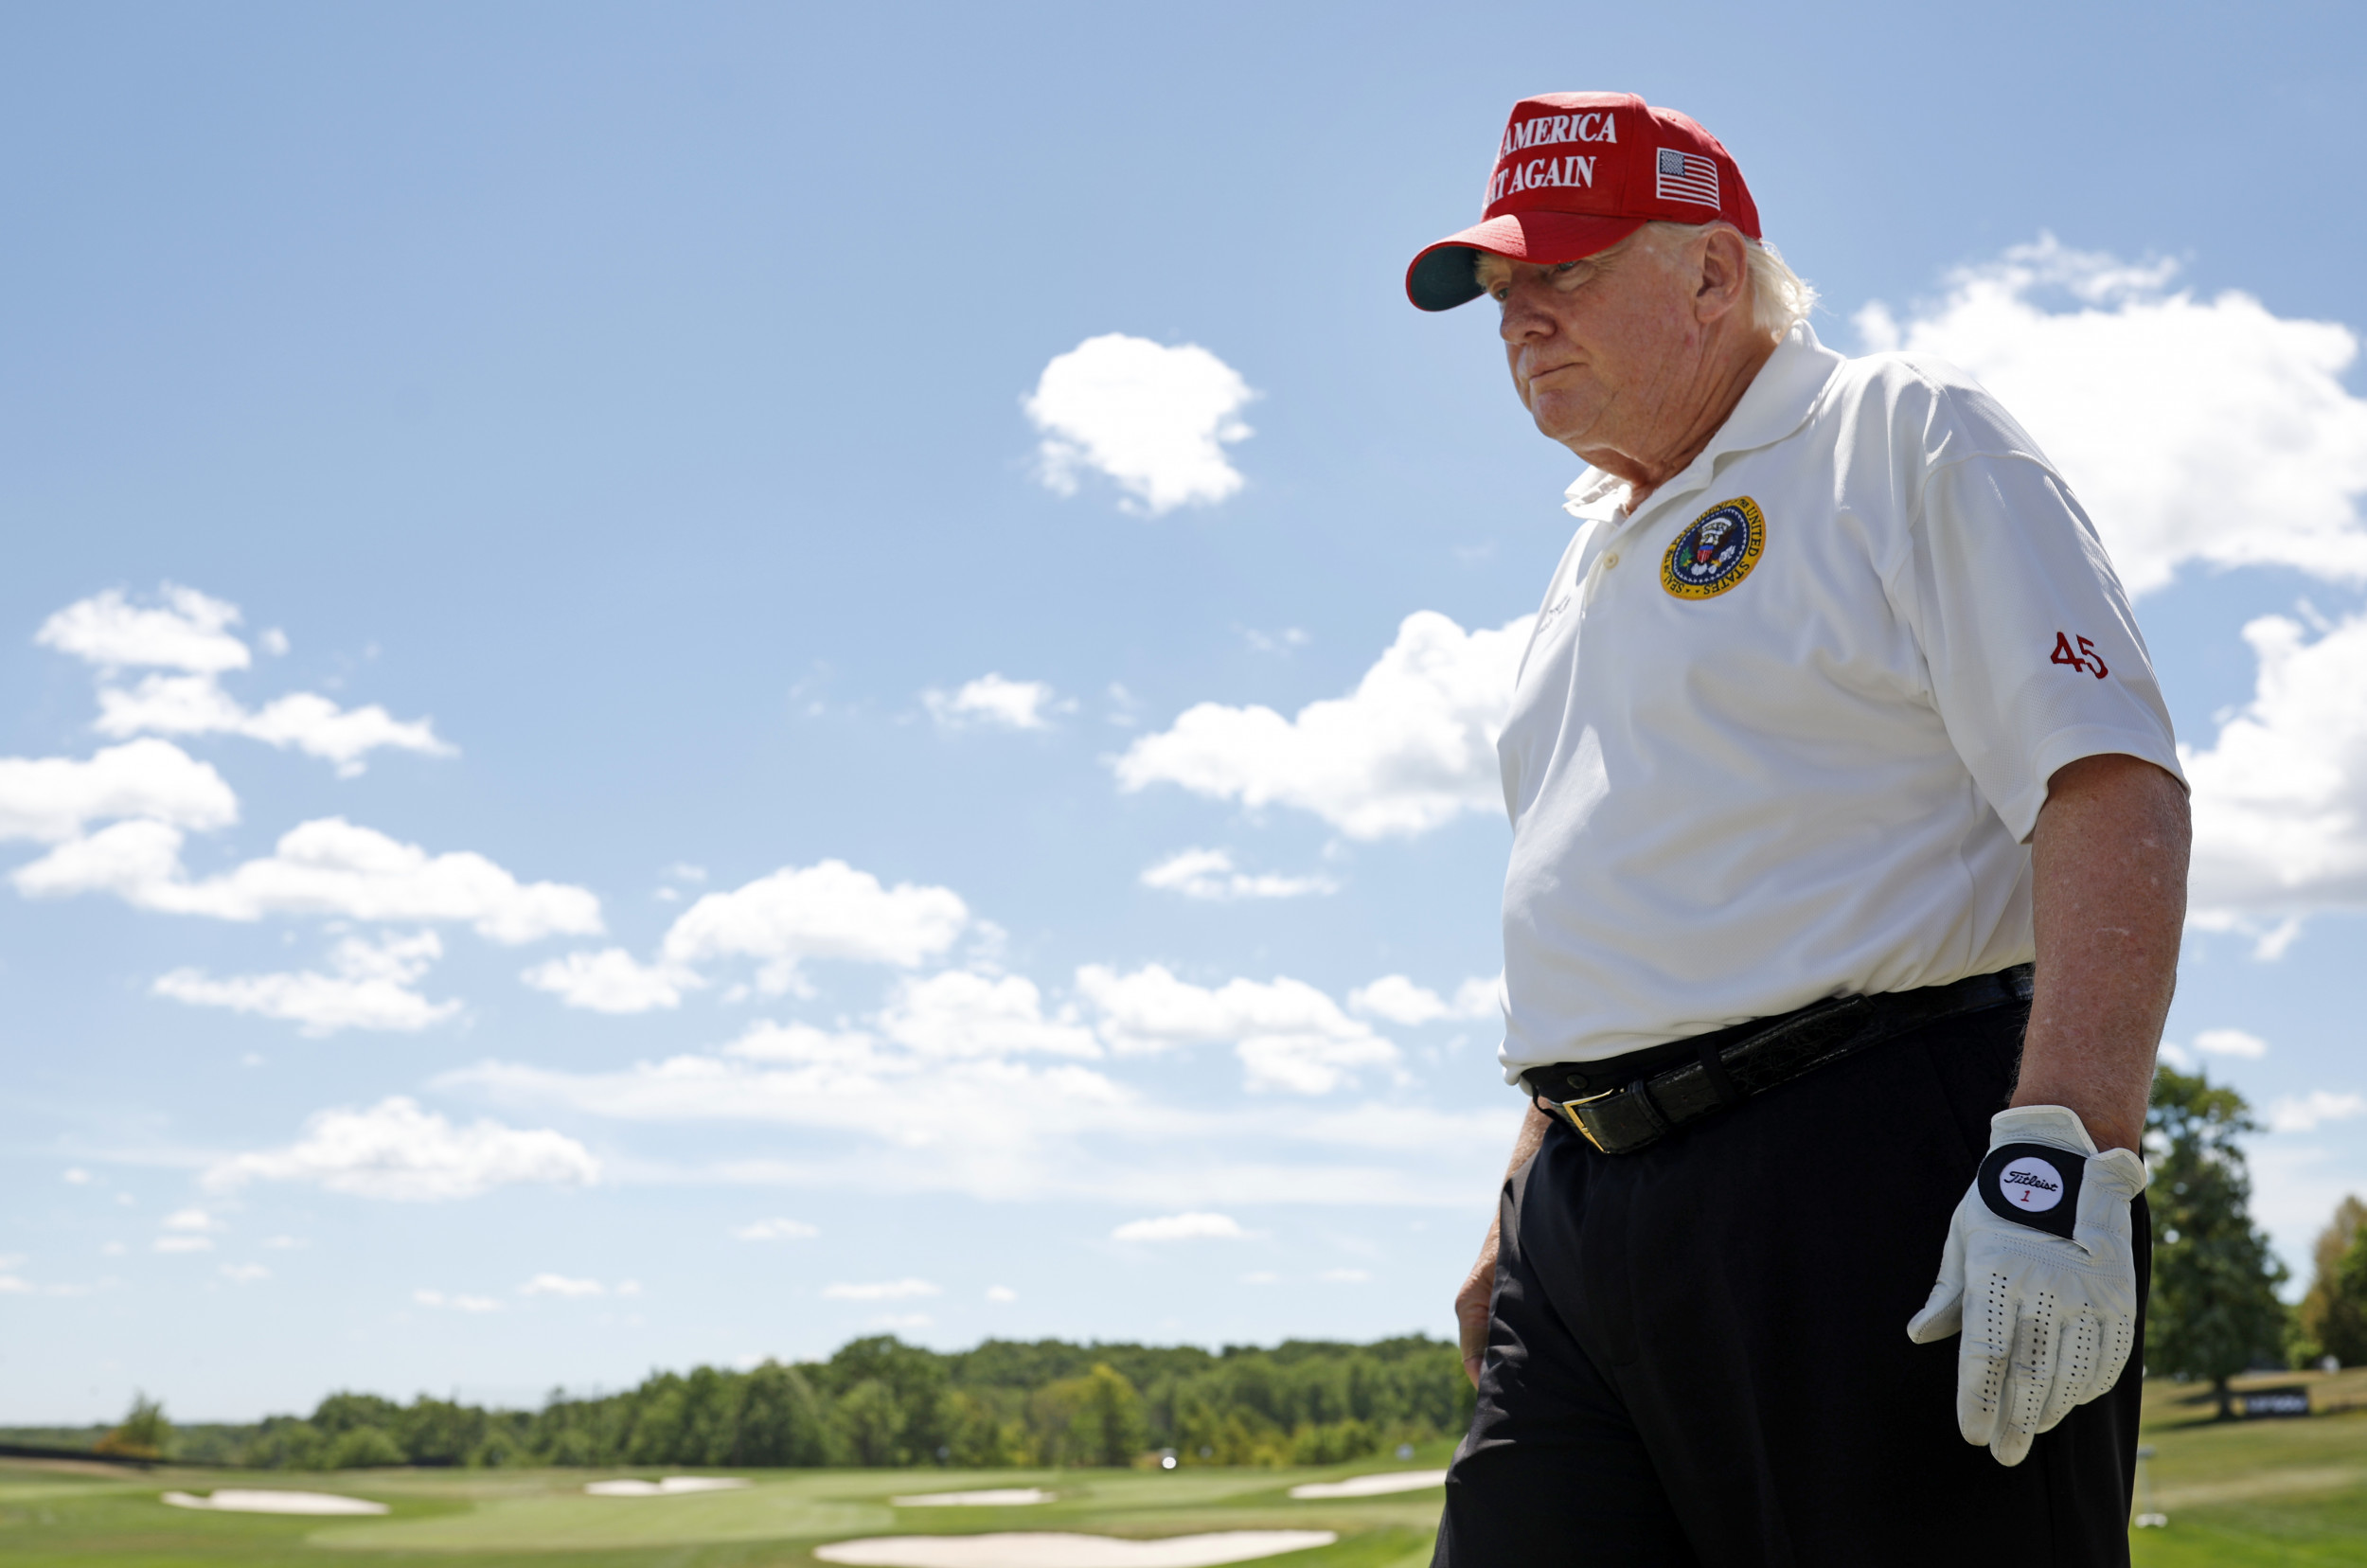 i will not have time to golf. trump